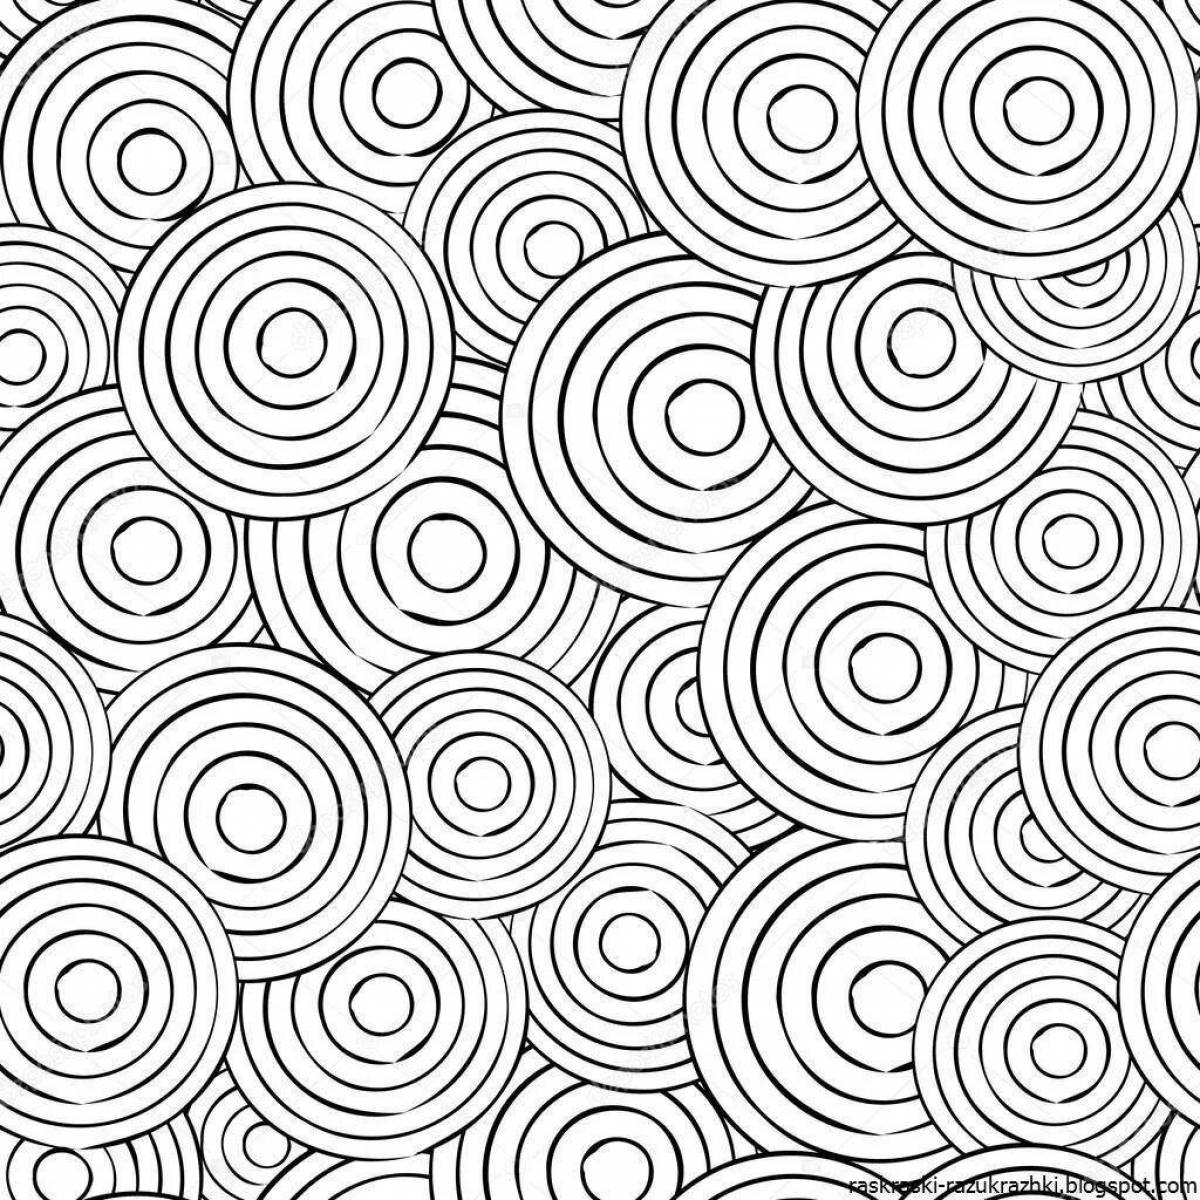 Large striped circle coloring page